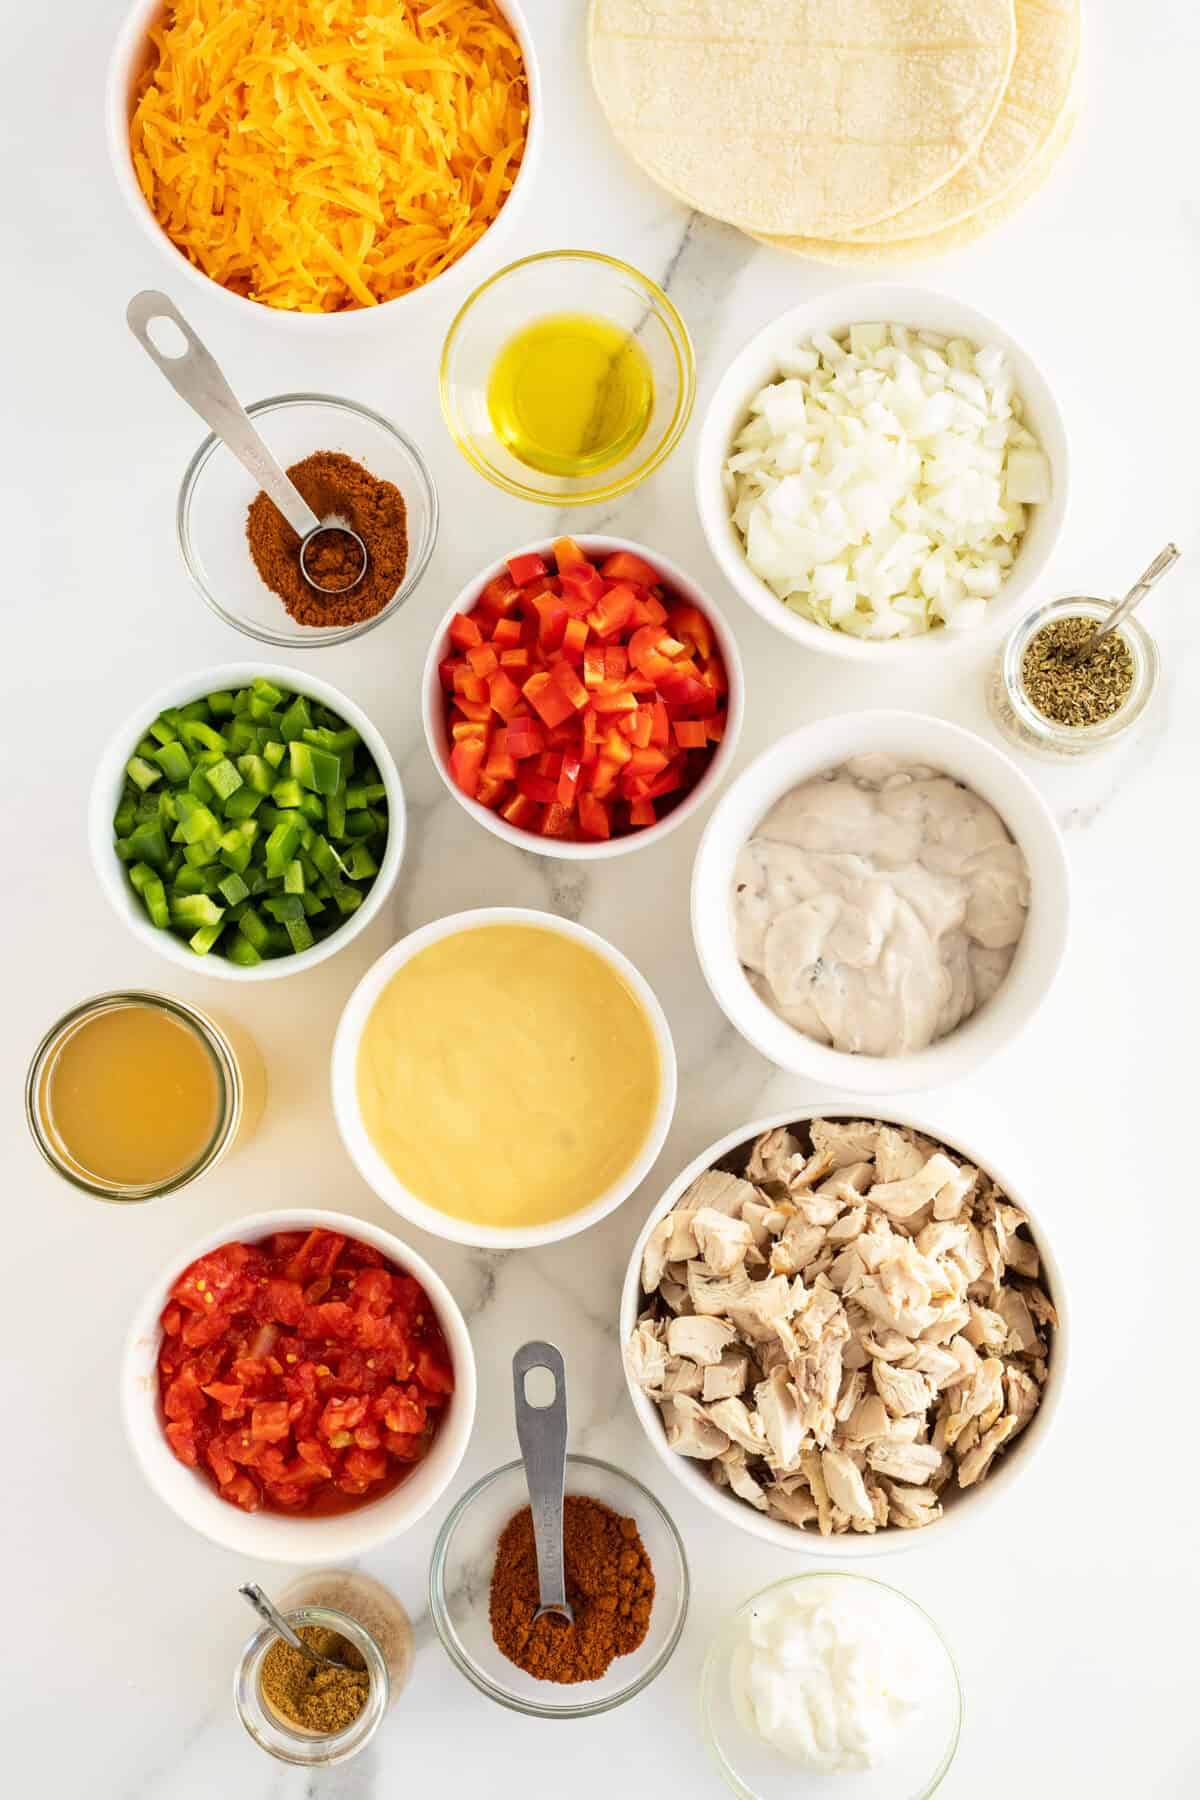 king ranch casserole ingredients in small white bowls